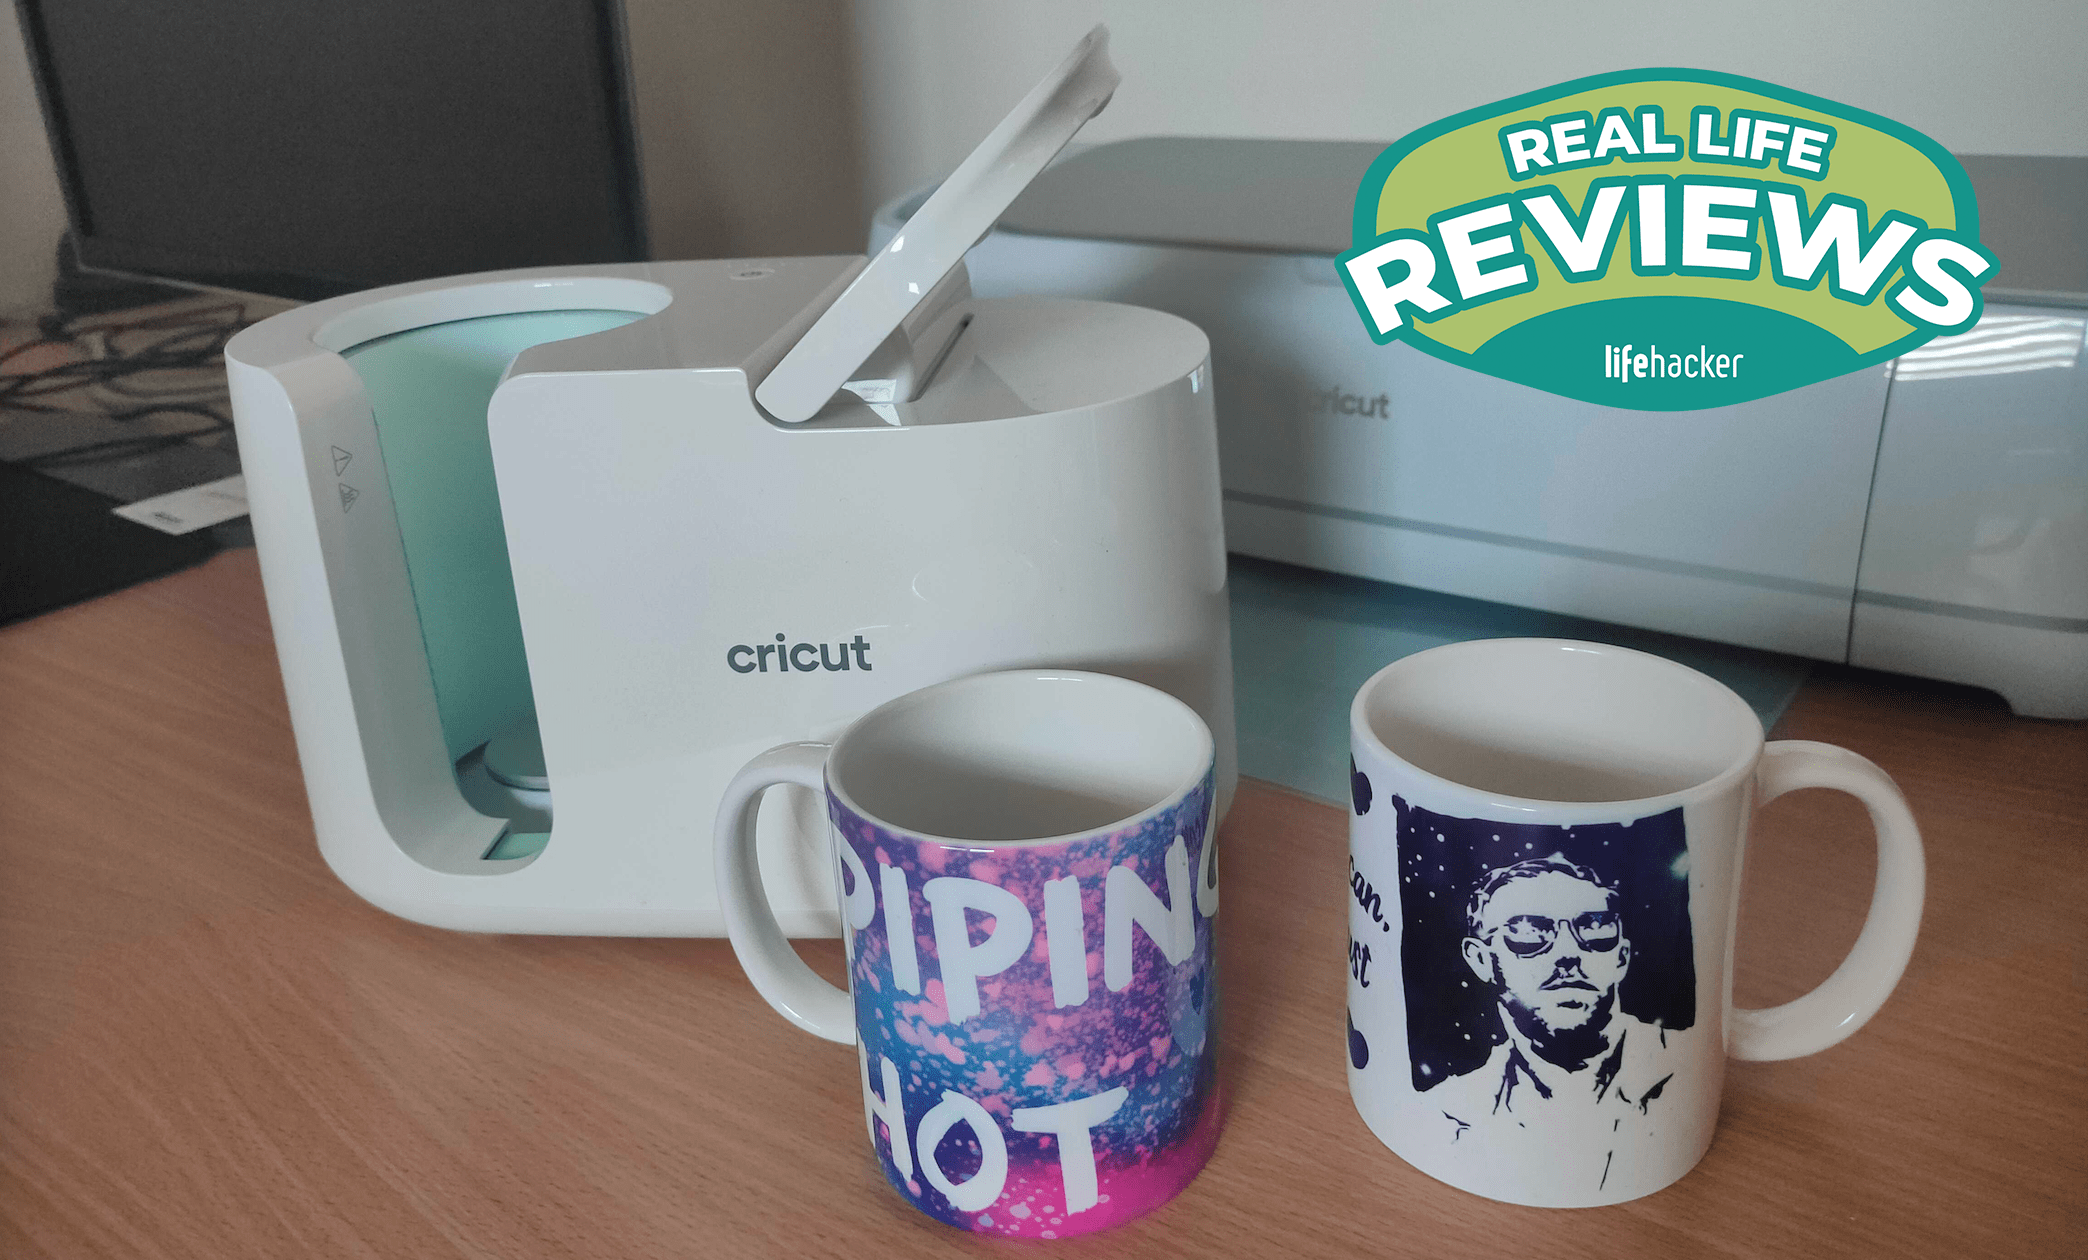 Cricut Mug Press Review - Is it Worth the Cost?